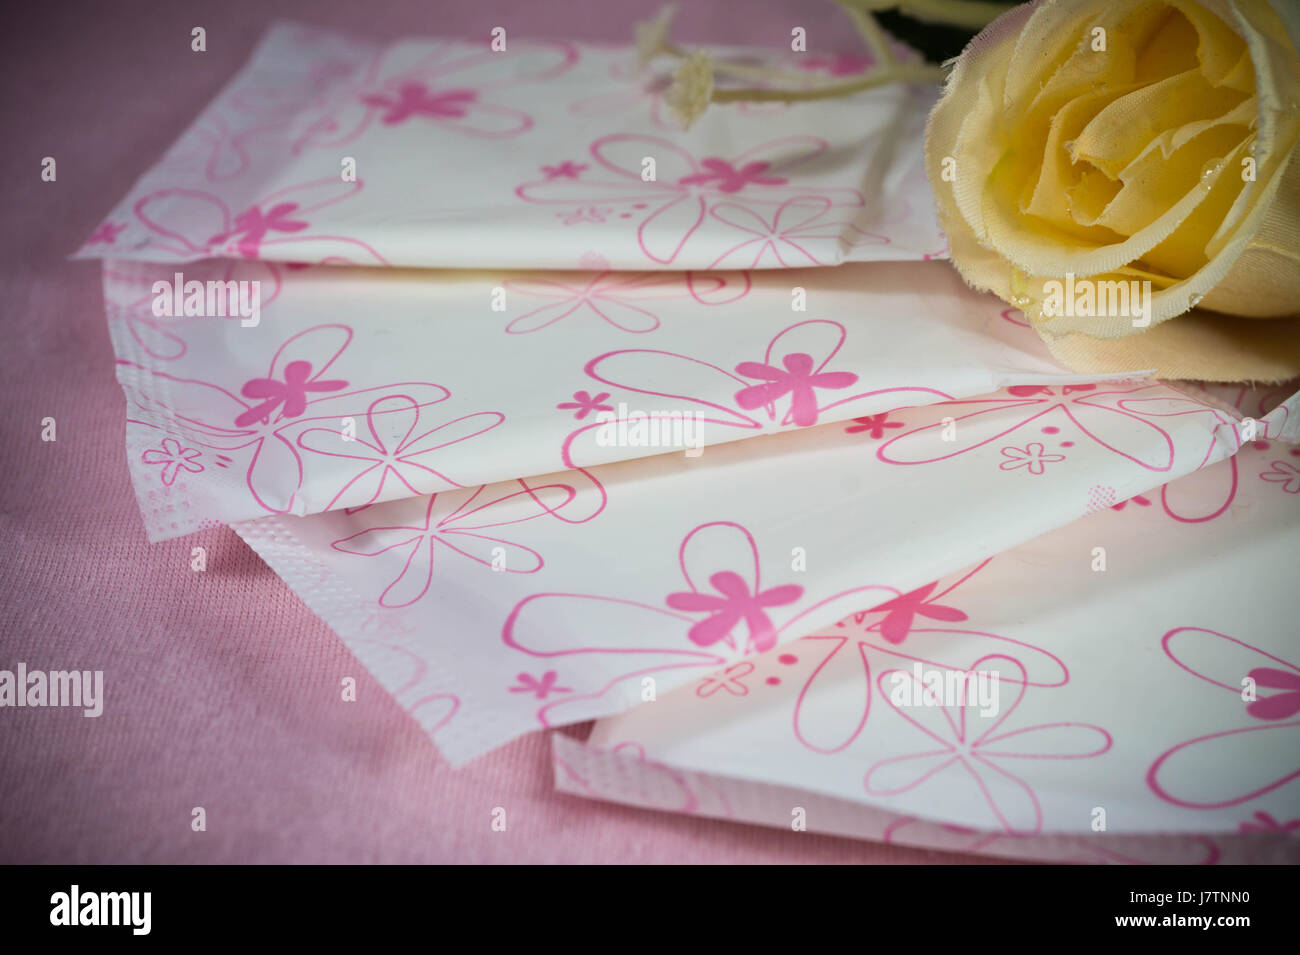 Sanitary pad package for woman hygiene protection Stock Photo